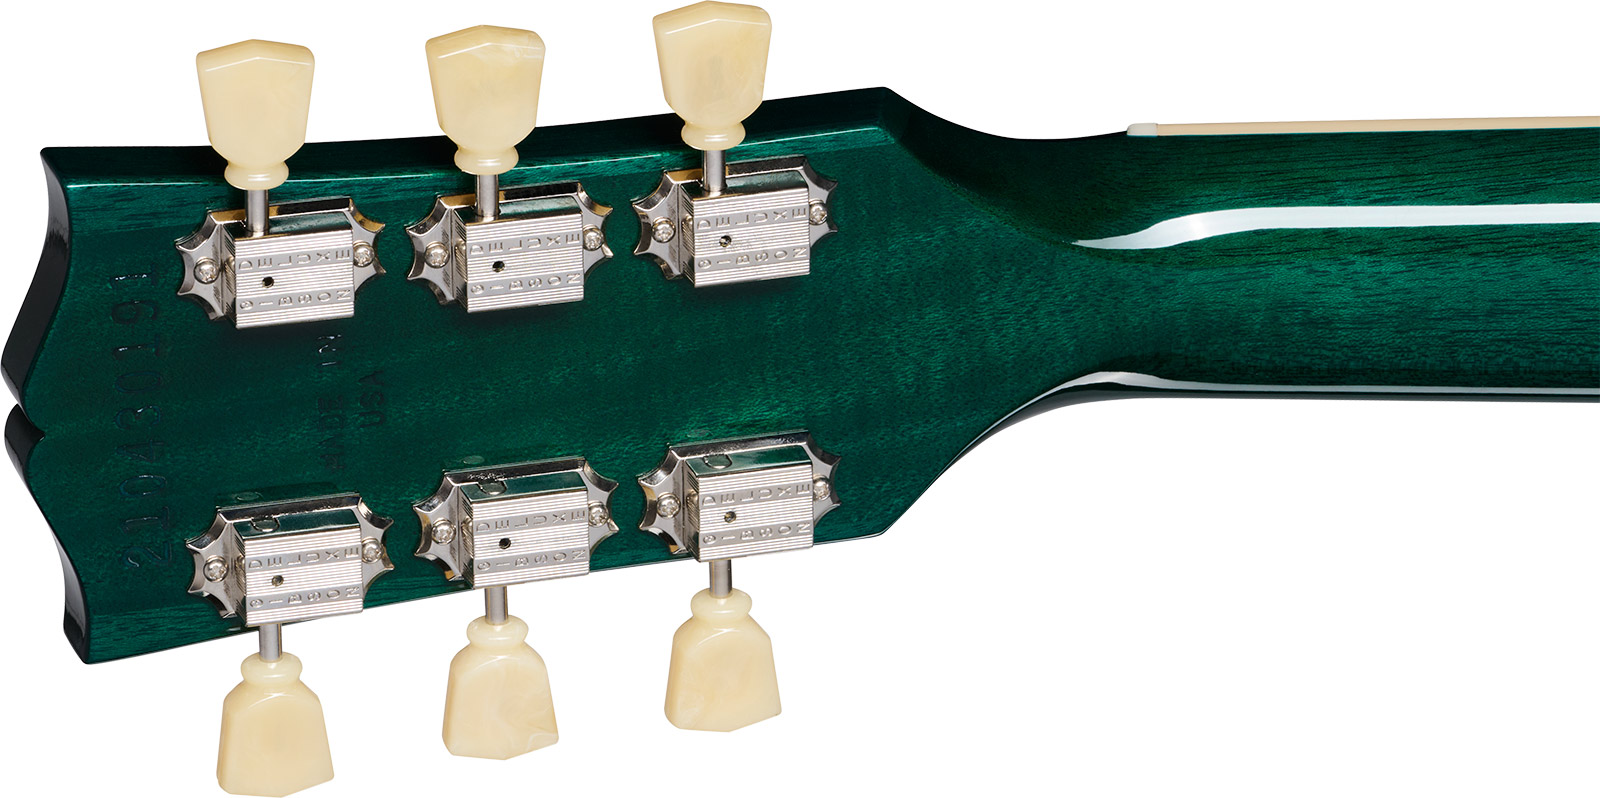 Gibson Sg Standard 1961 Custom Color 2h Ht Rw - Translucent Teal - Double cut electric guitar - Variation 4